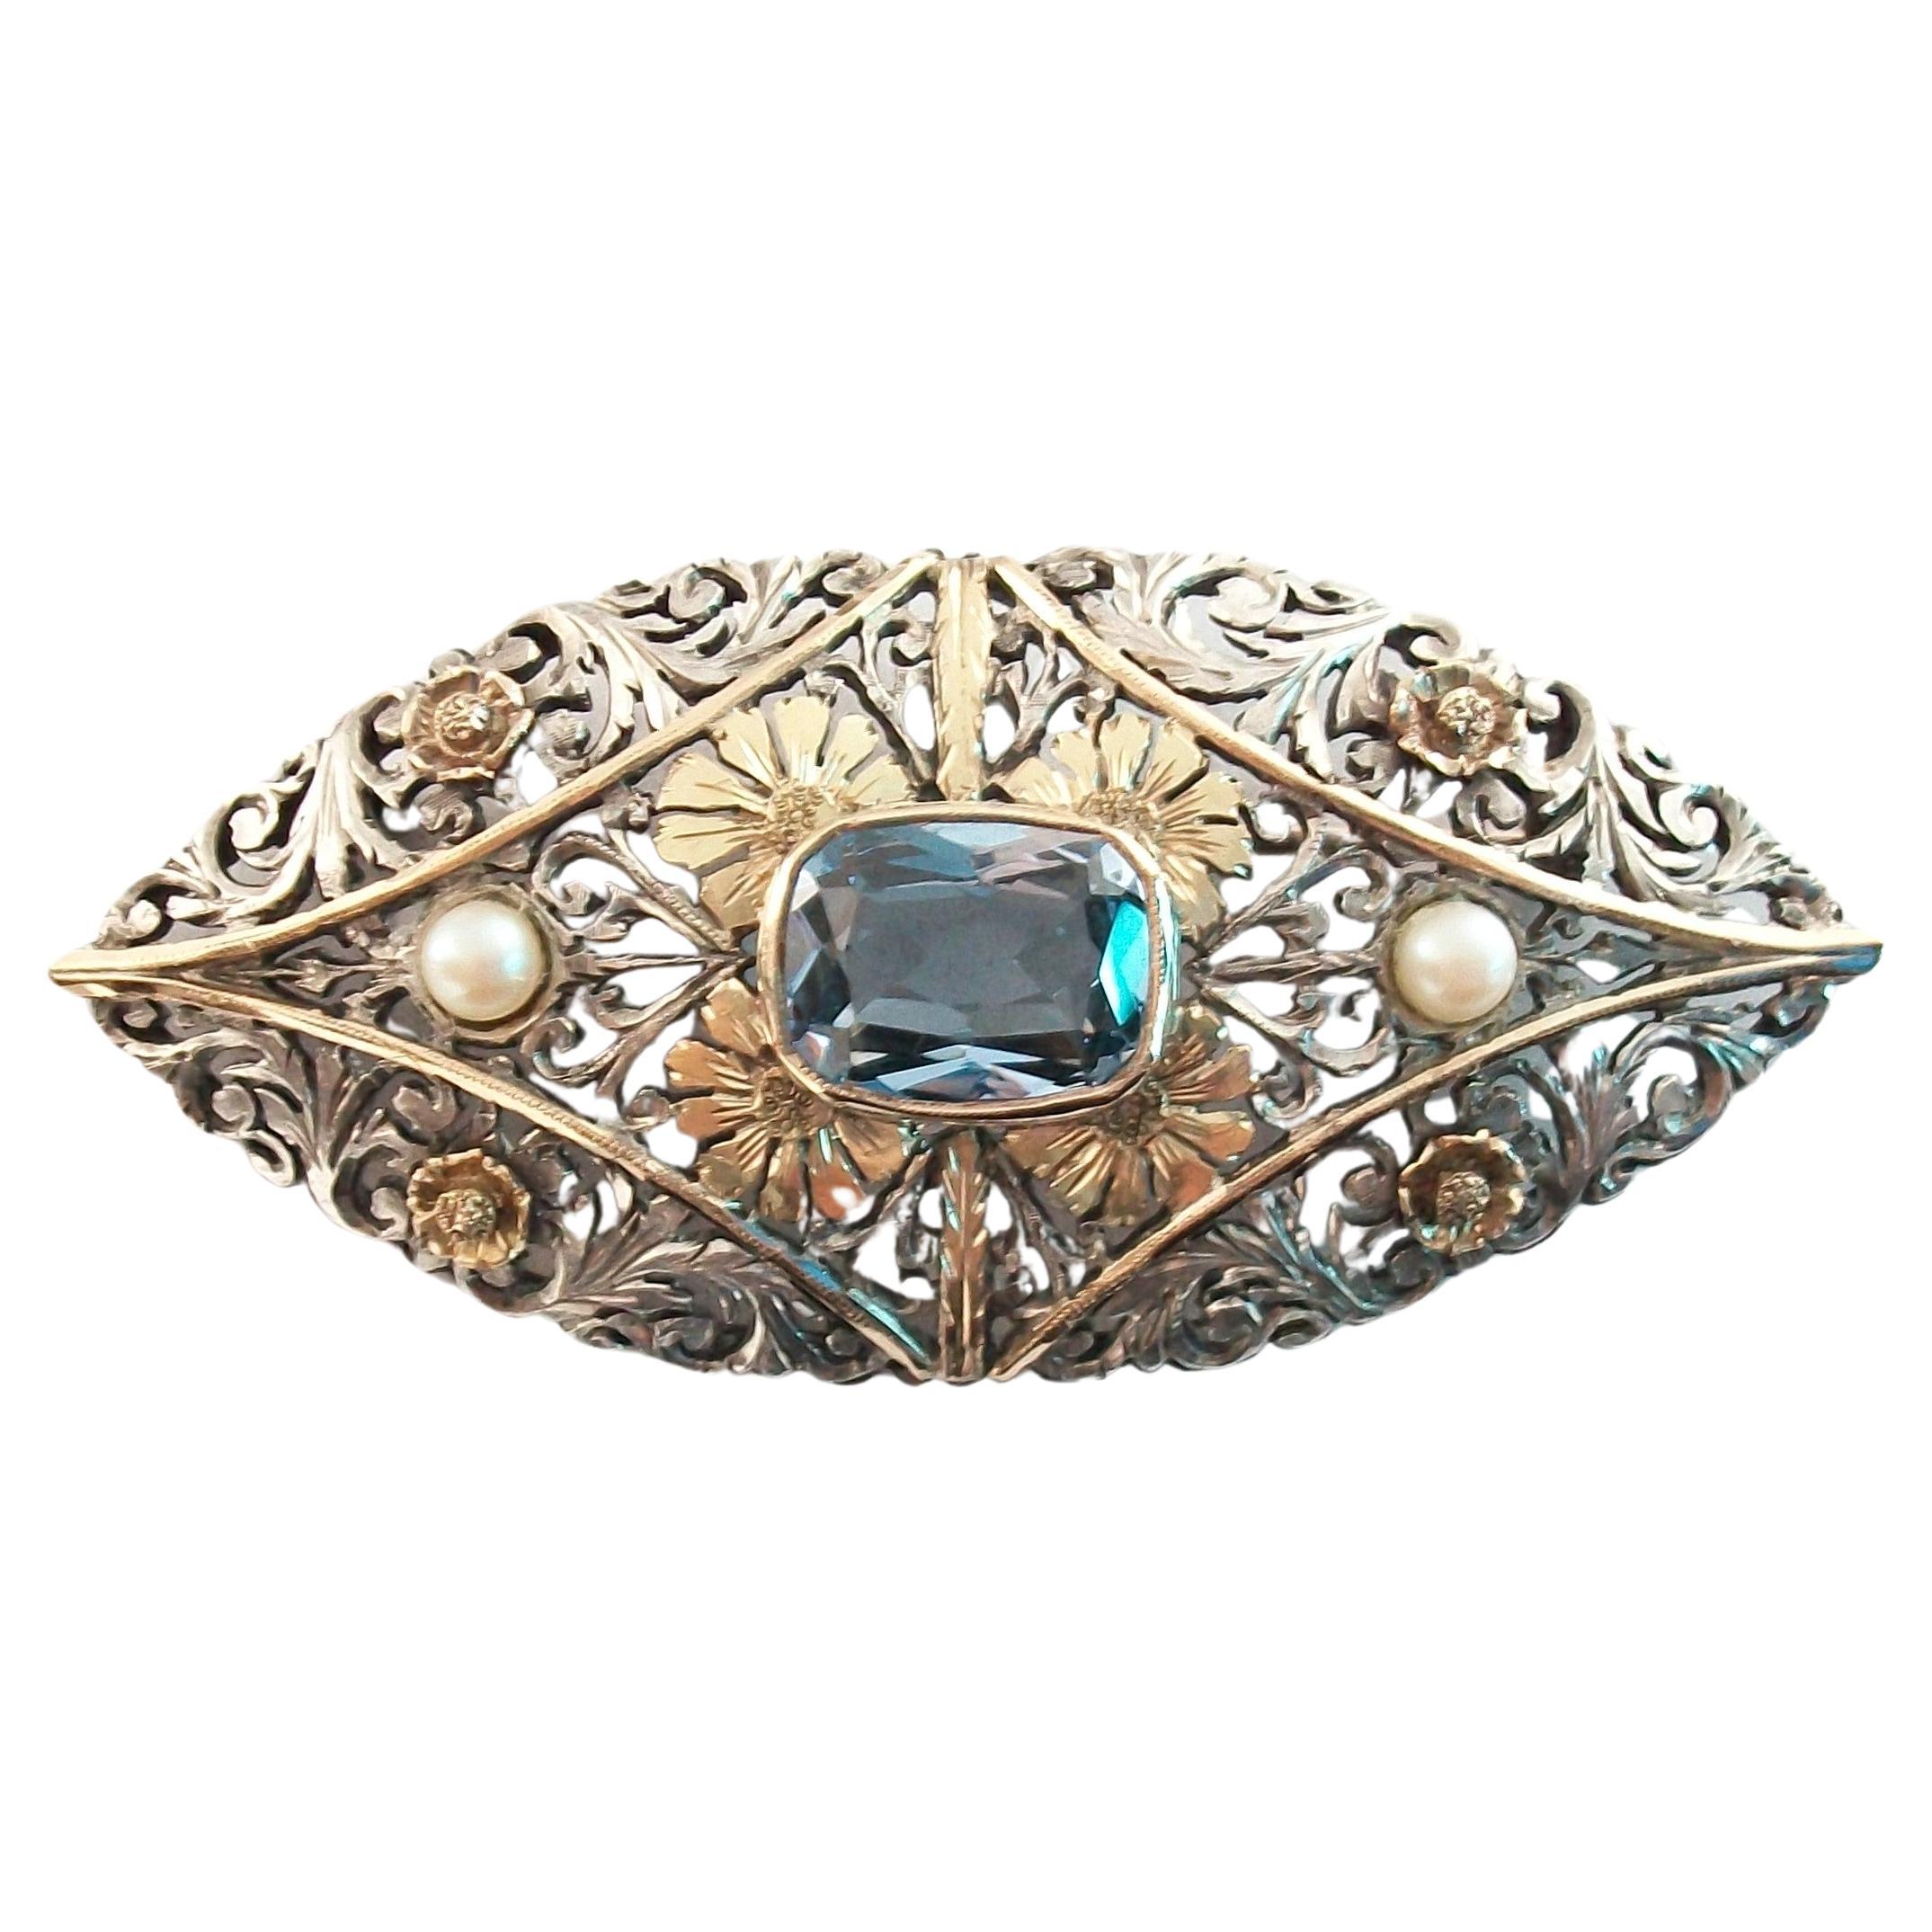 Art Nouveau Aquamarine & Pearl Brooch Set in Silver & Gold - France - Circa 1900 For Sale